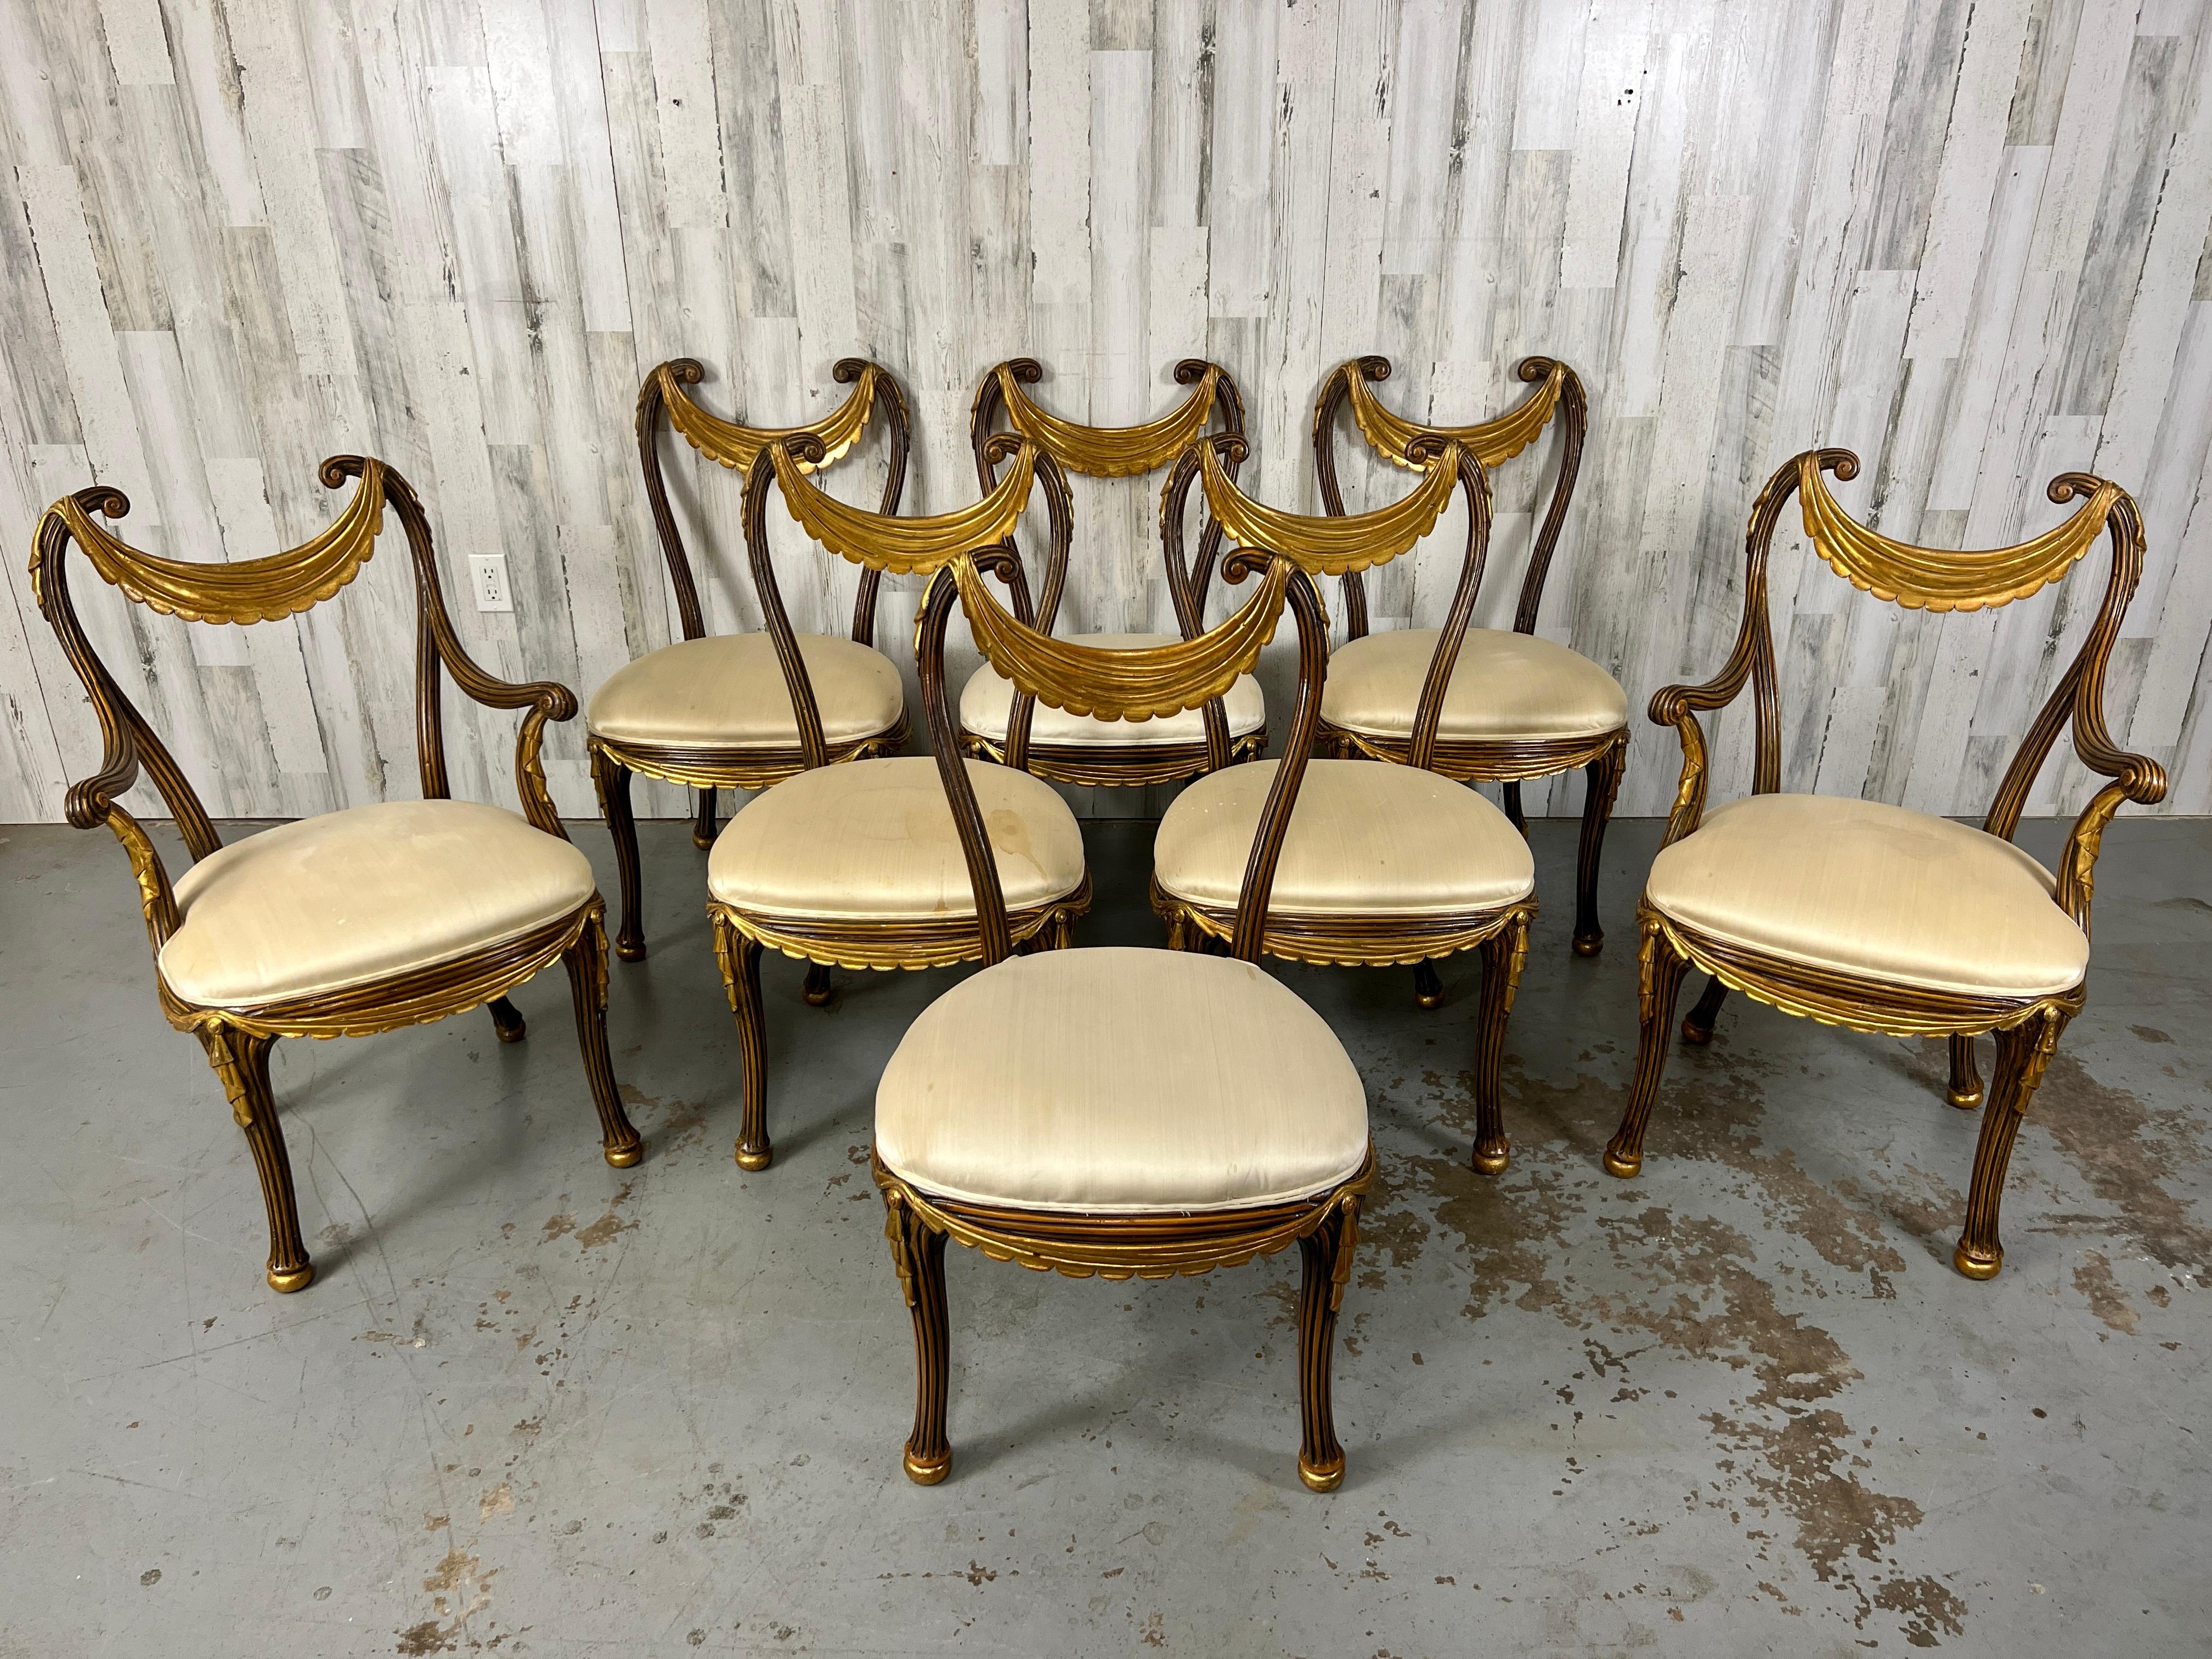 Neoclassical Revival 1930s Italian Partial Gilt Dining Chairs For Sale